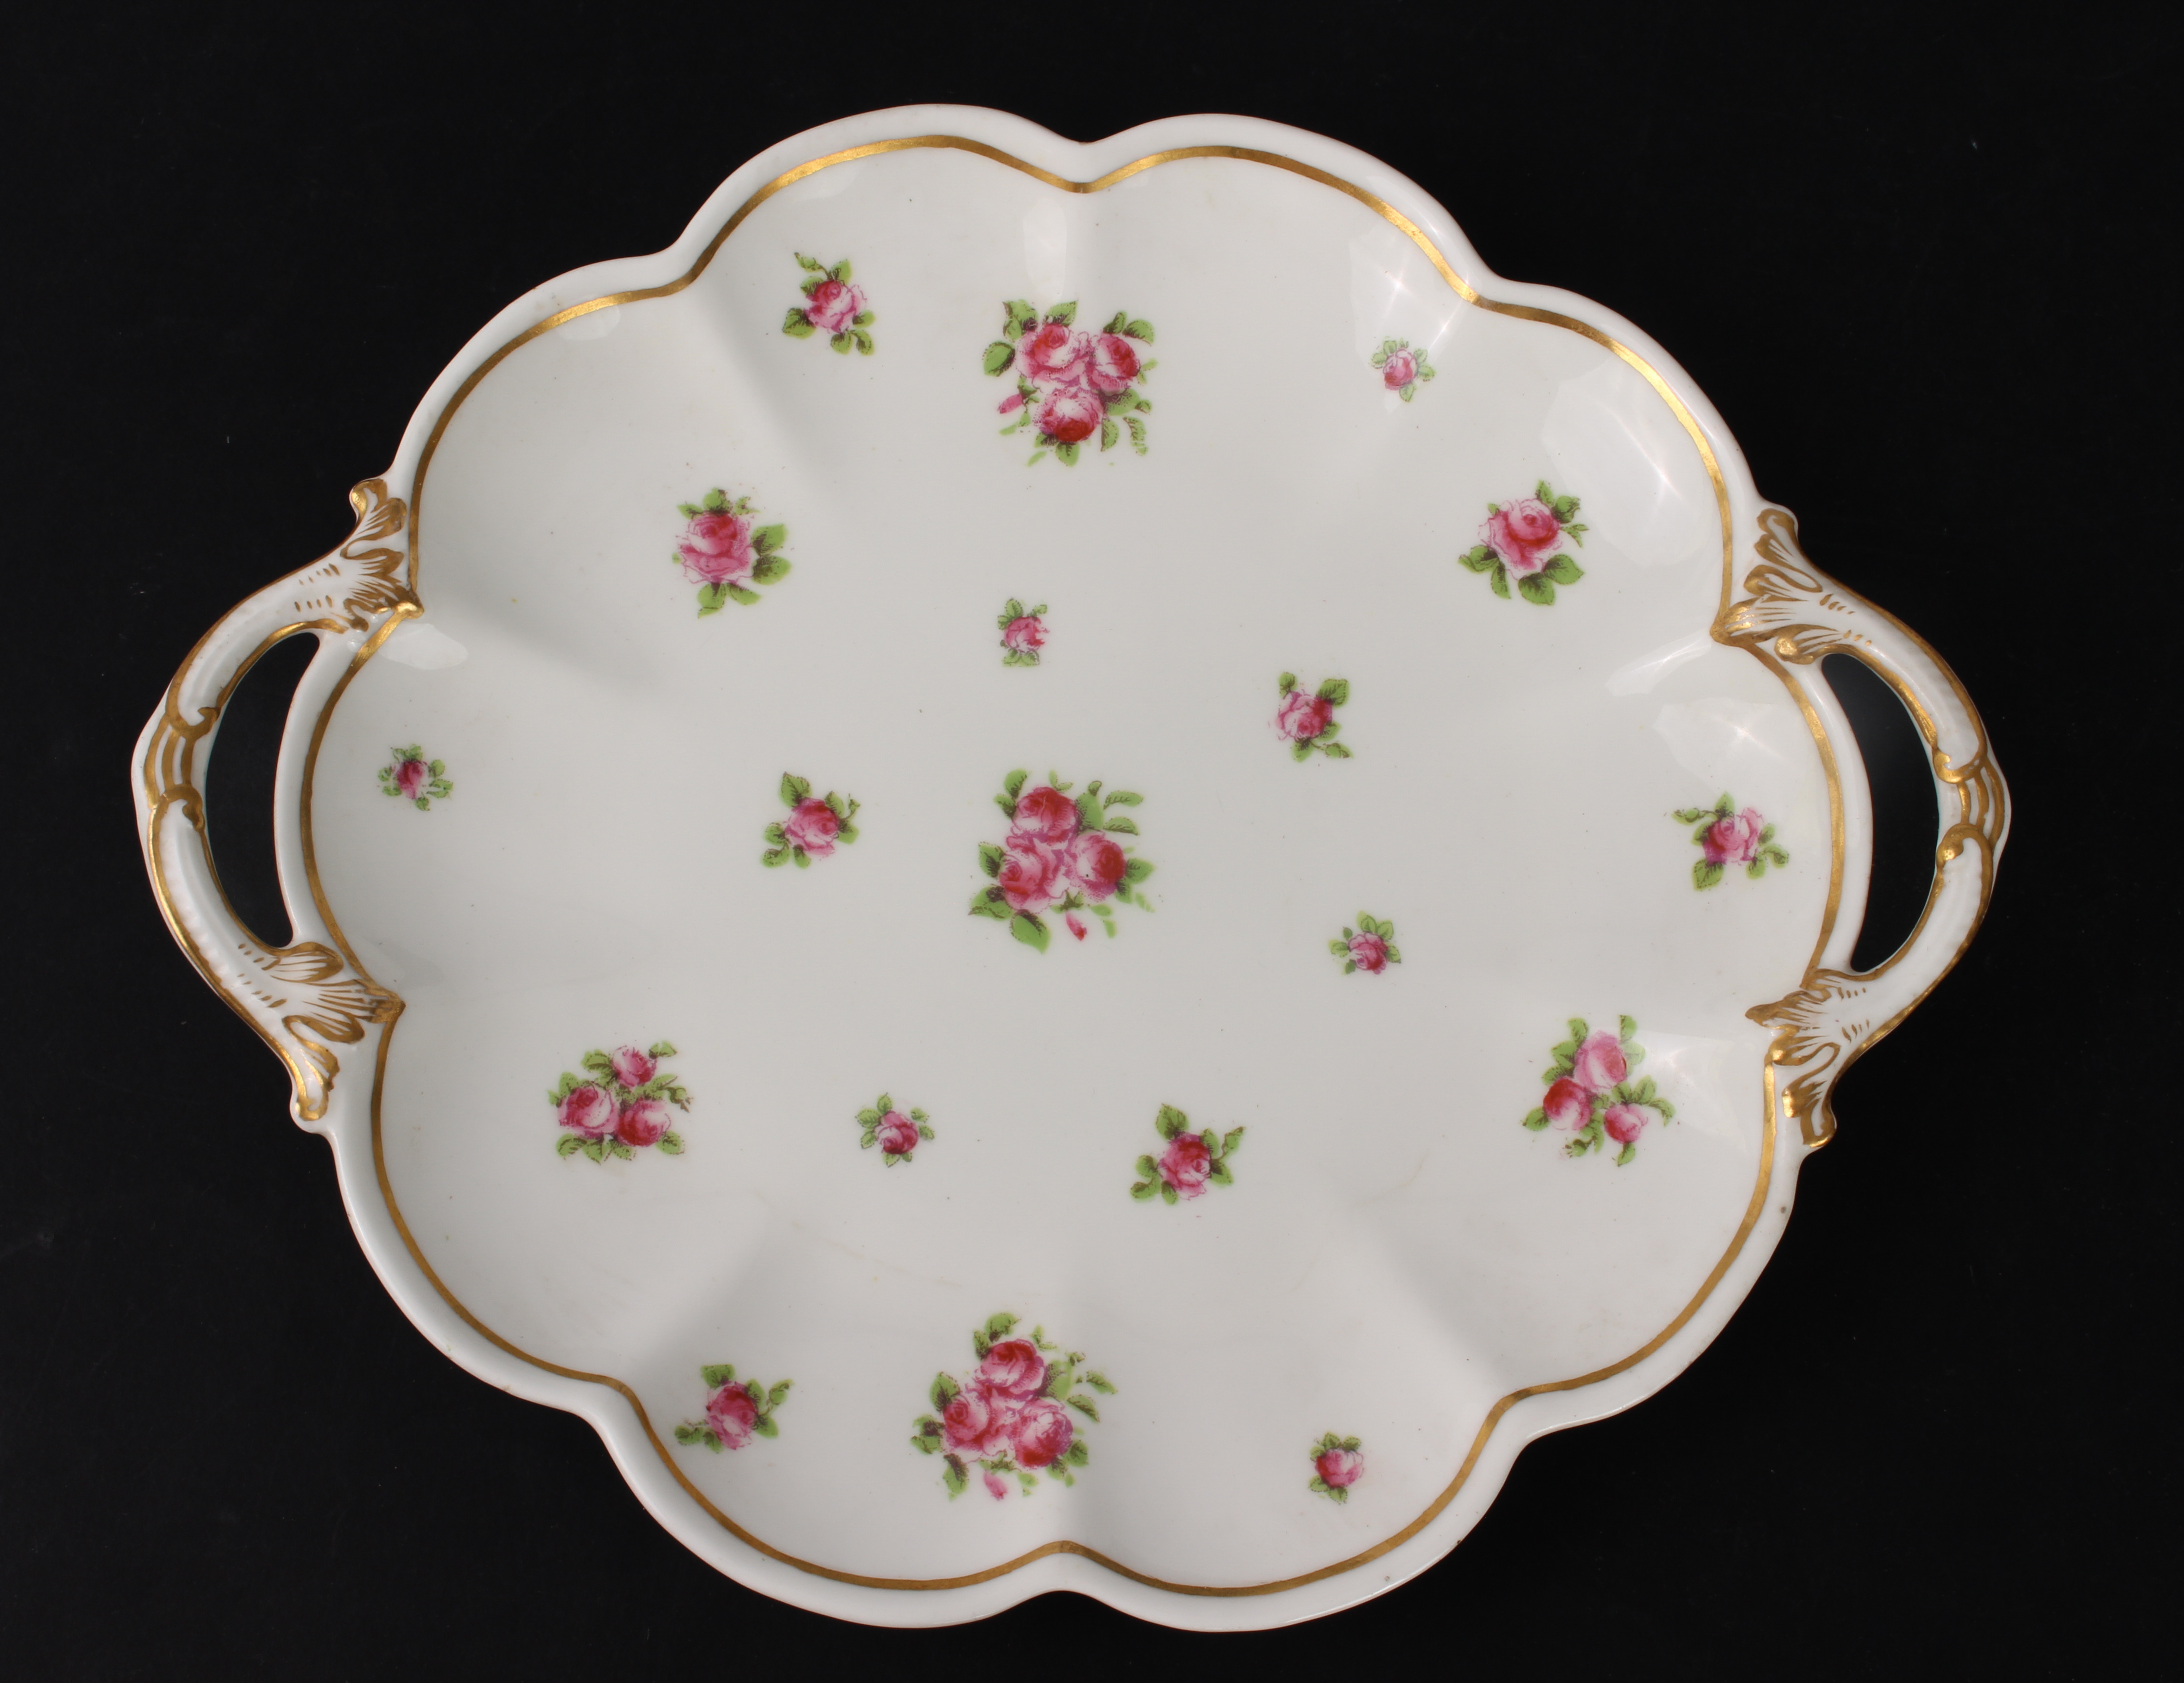 A vintage Crescent & Sons China pink rose decorated part tea service for twelve - pattern no. 17837, - Image 2 of 3